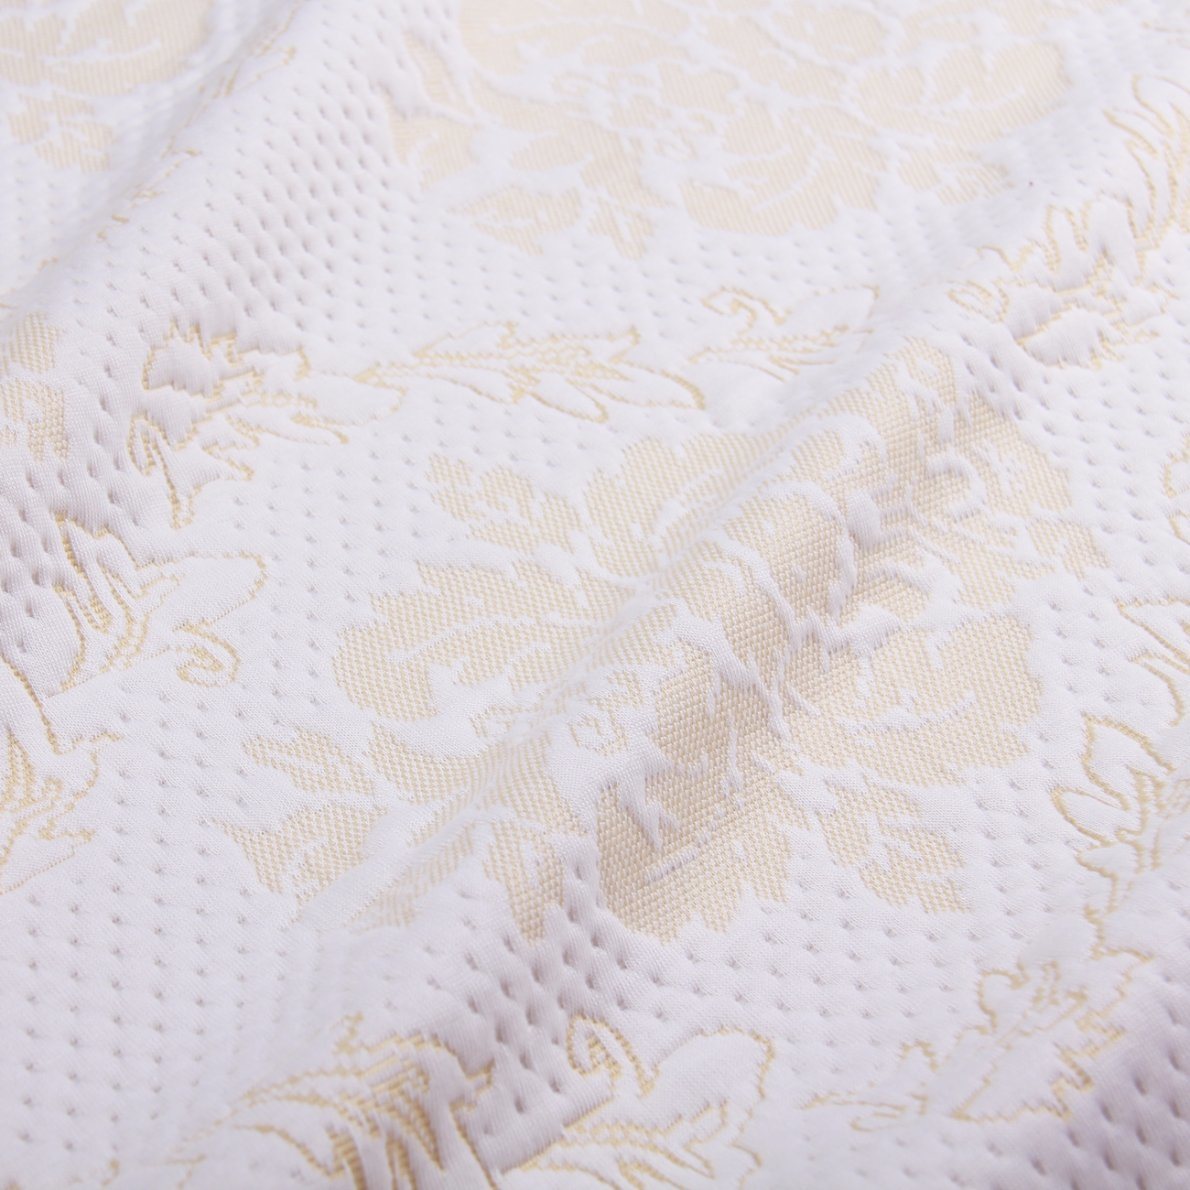 Polyester Knitting Jacuqard Hotel Fabric - Decorative Fabric for Mattress and Pillow